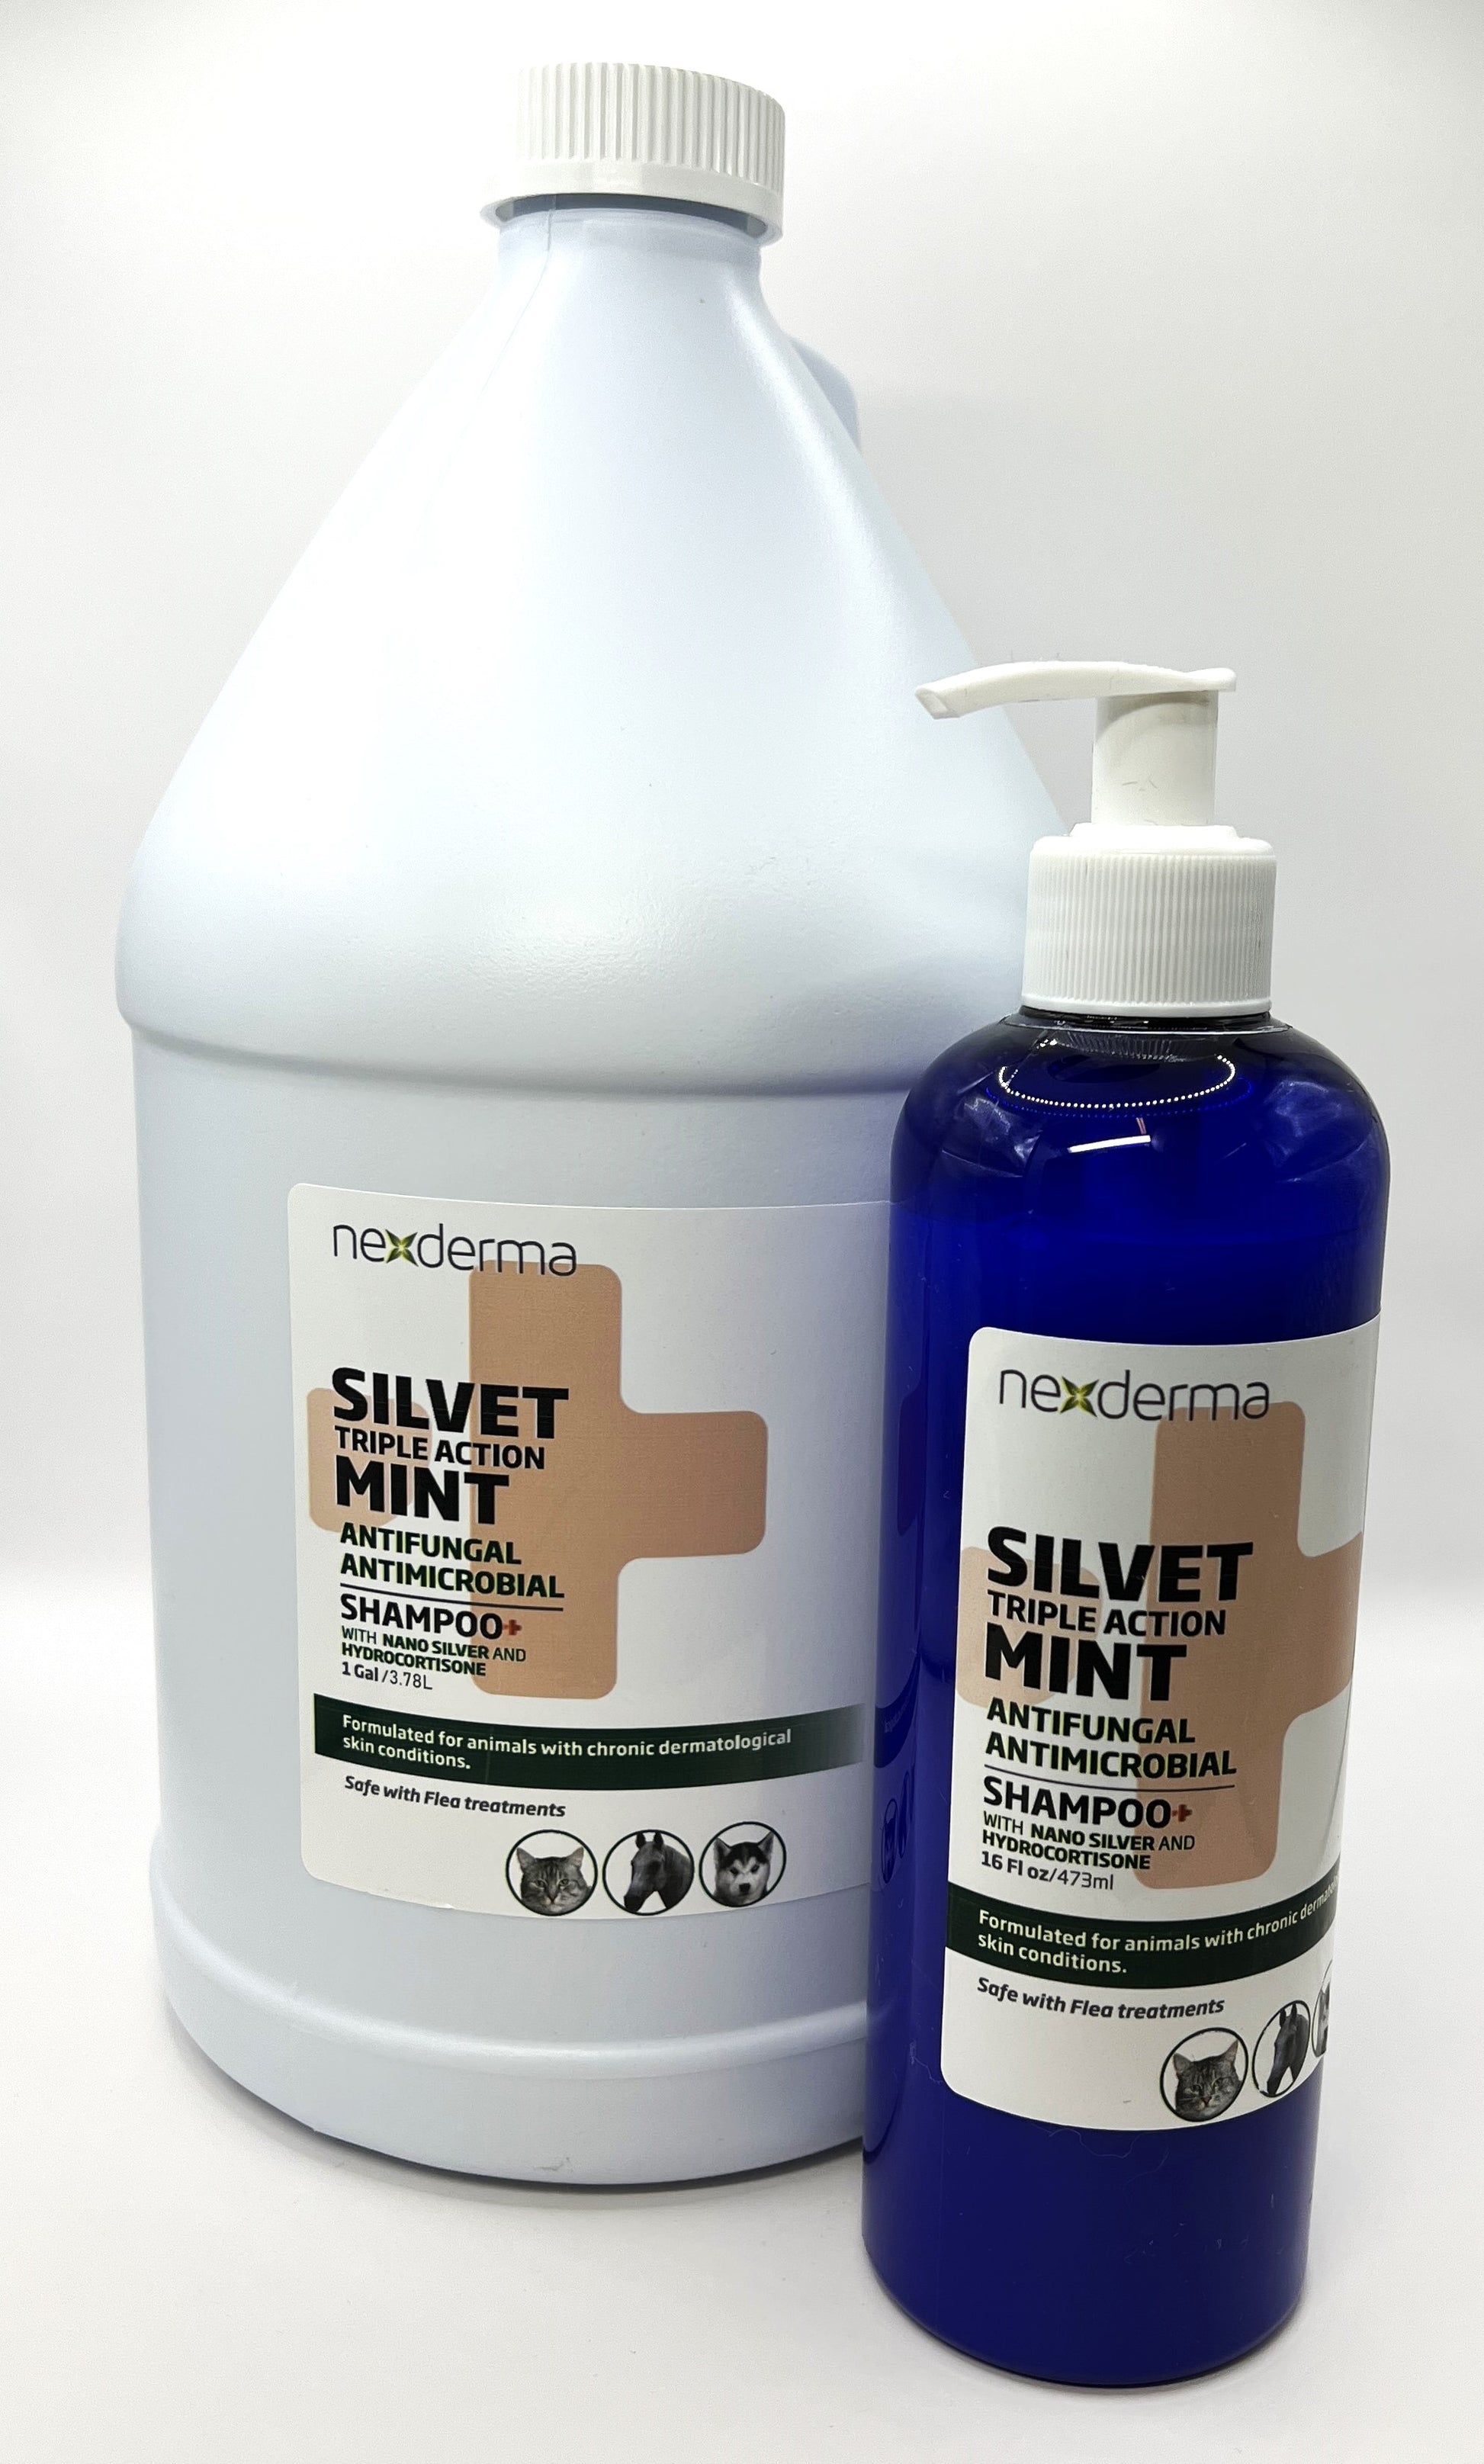 Nexderma's Silvet Triple Action Antifungal-Antimicrobial Pet Shampoo contains Colloidal Silver, suspended in our Stem-Gel based proprietary formula with hydrocortisone. This Anti-itch formula relieves pain, itching, swelling and stinging, while clinically proven to speed up healing of common skin conditions.  Mint.